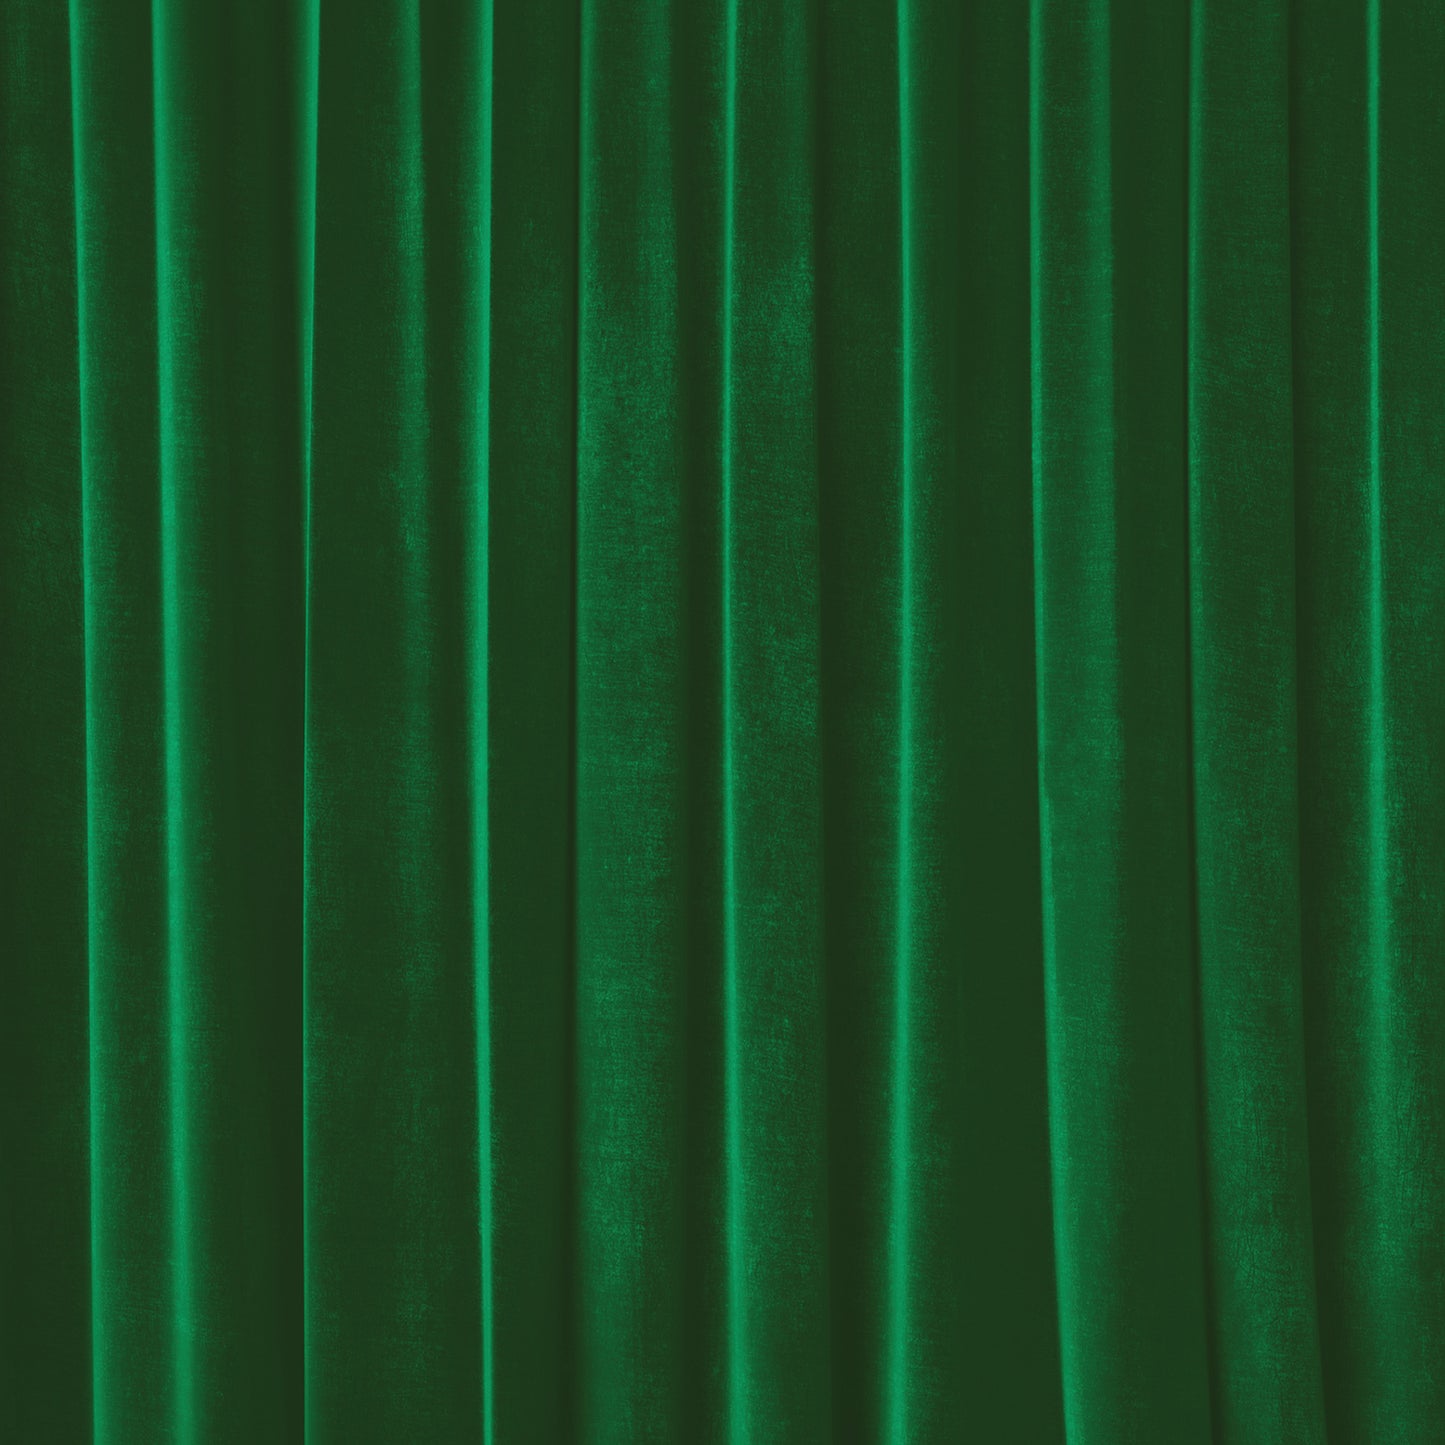 Green Velvet Curtain Rigid Photography Backdrop | Flat Lay Photo Surface | Product Photography | Food Photography | Photo Styling Mat